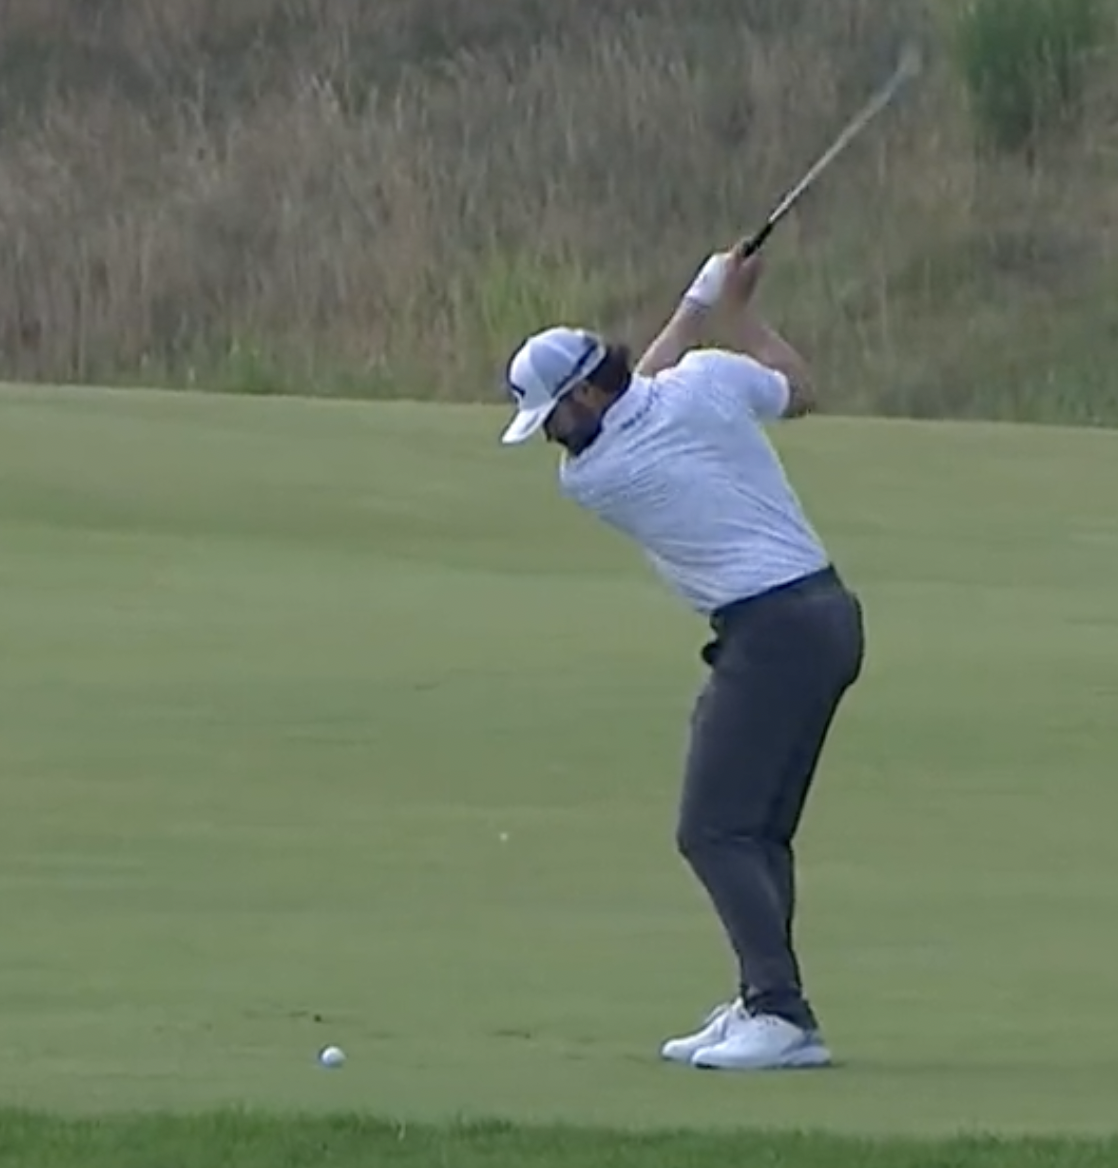 This is it, this is the most preposterous putting grip we've ever seen, This is the Loop